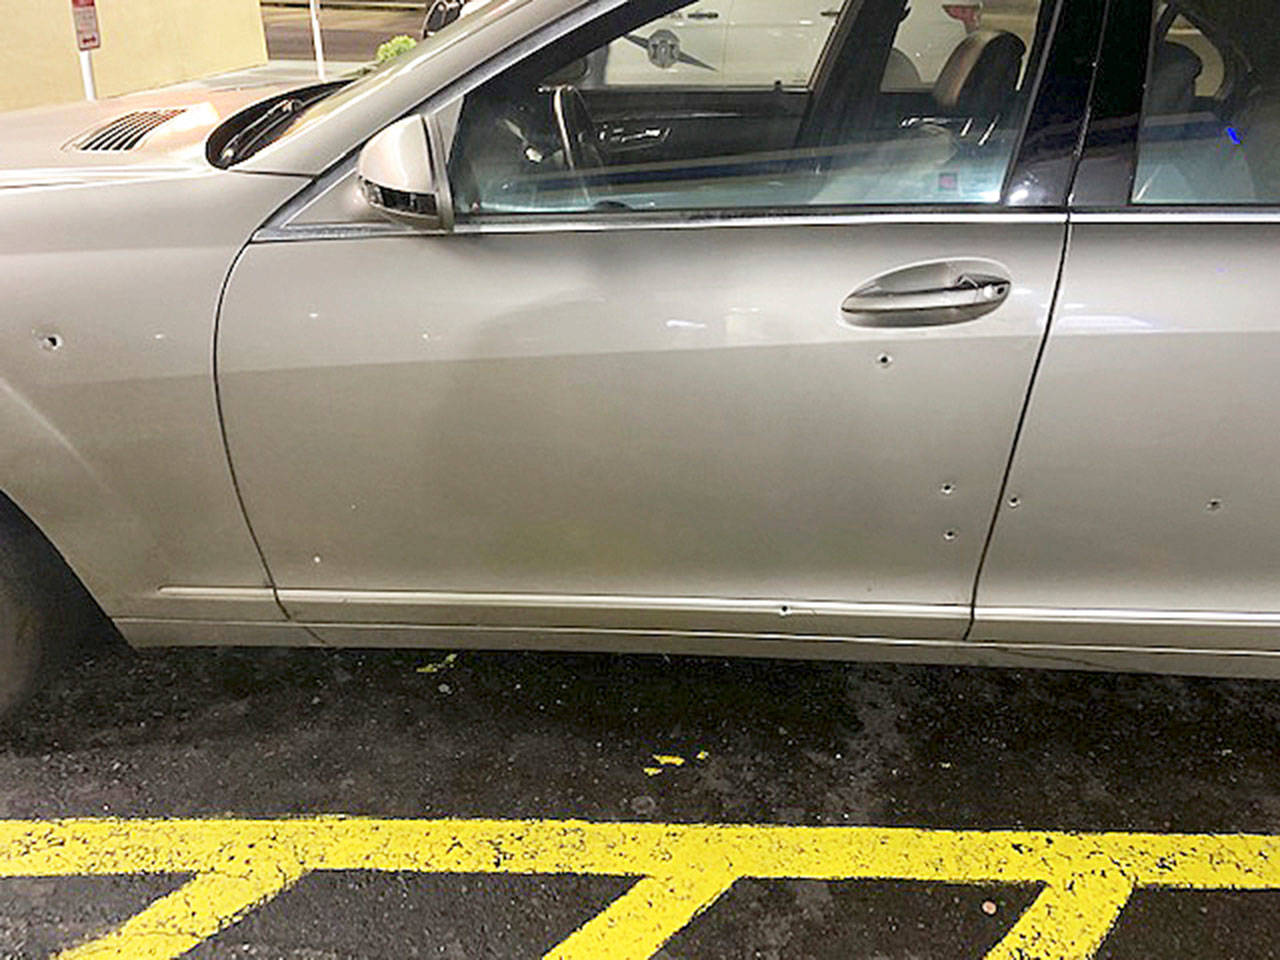 The Washington State Patrol released this photo of a car riddled with bullet holes after a shooting Thursday along Interstate 5 in Kent. The driver suffered a gunshot wound to the lower back. COURTESY PHOTO, State Patrol